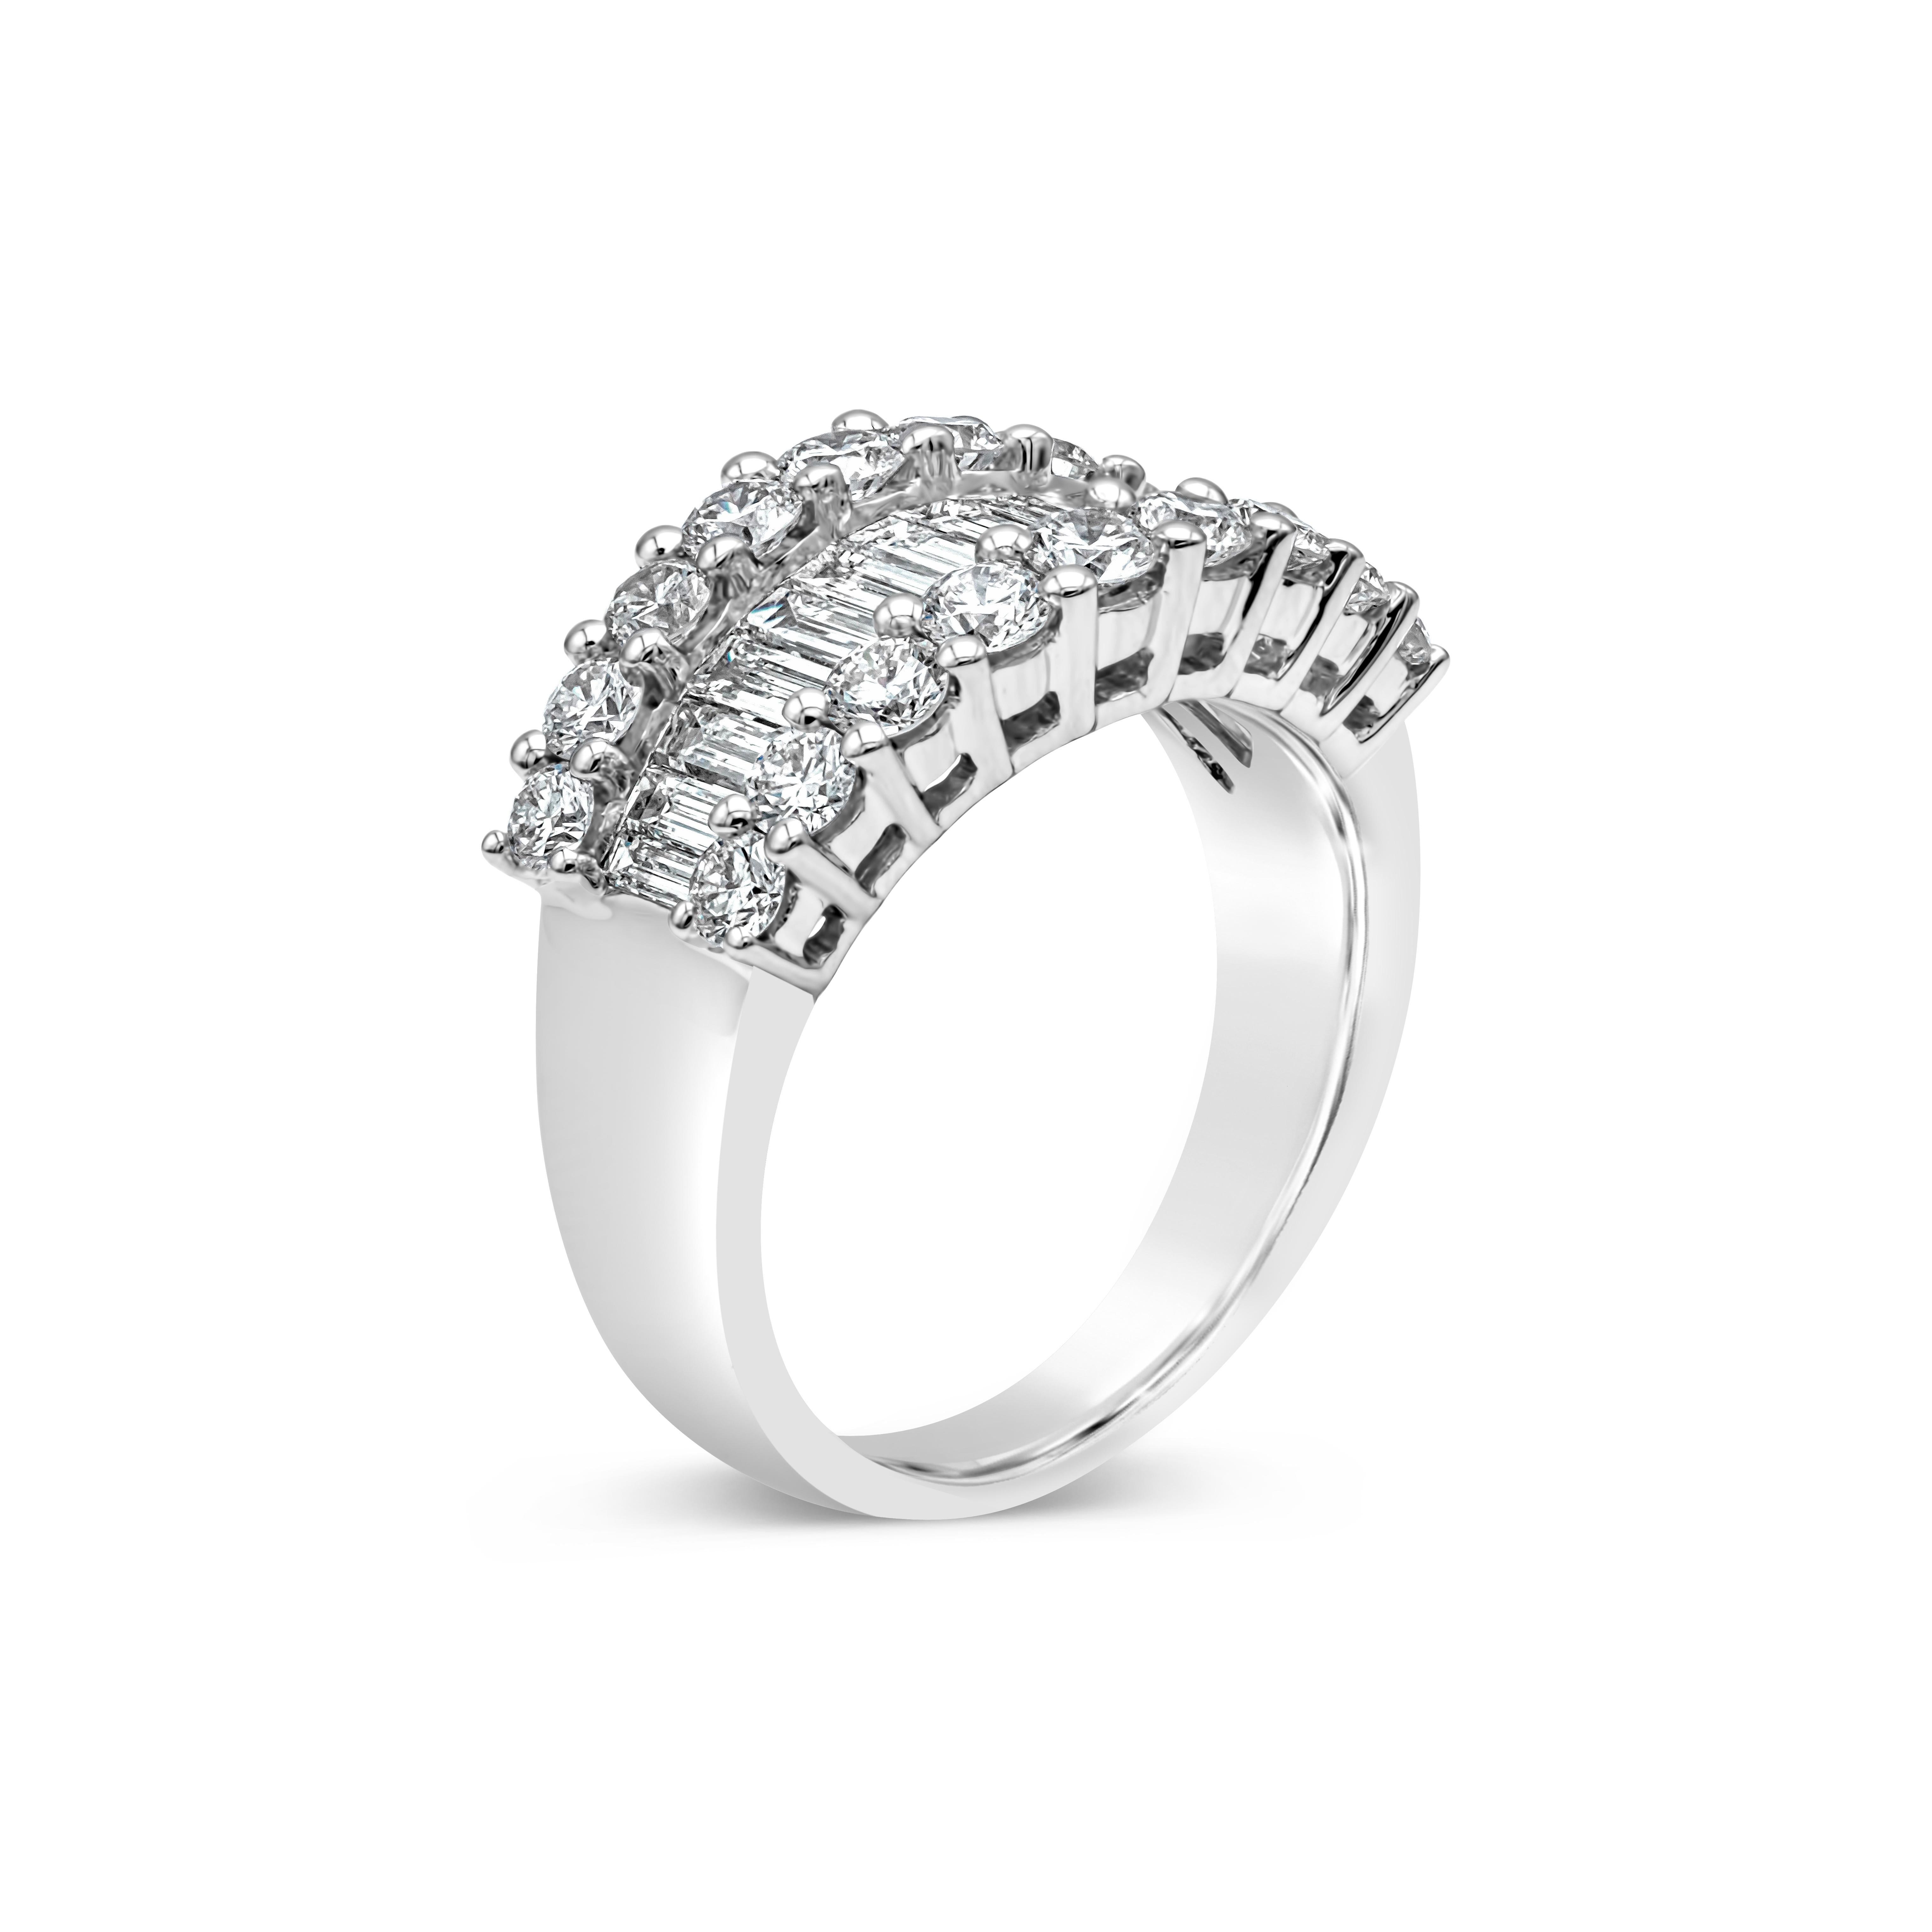 A chic diamond band showcasing 14 baguette diamonds that elegantly graduate in size, finished with 18 brilliant round diamonds on either side of the ring. Baguette diamonds weigh 0.84 carats total, F color and VS clarity. Round diamonds weigh 1.19